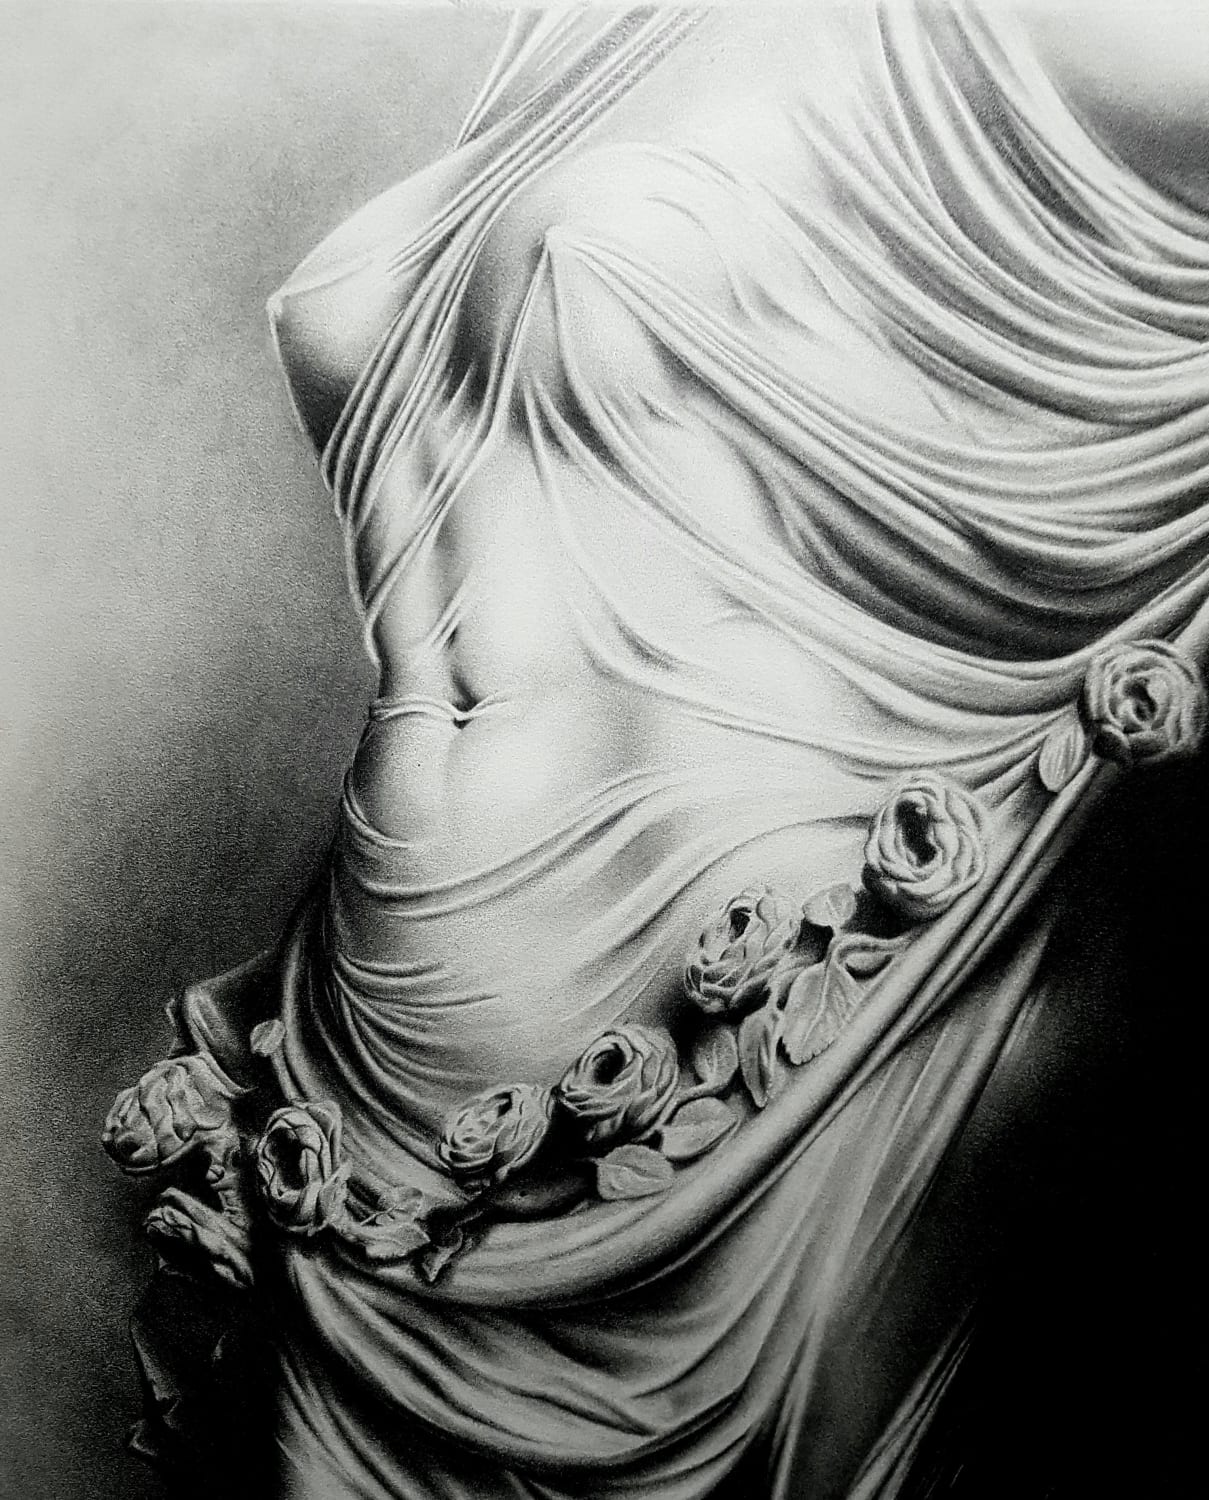 Study of Corradini's 'The Veiled Virtue' statue, by me. More @elbdms on insta